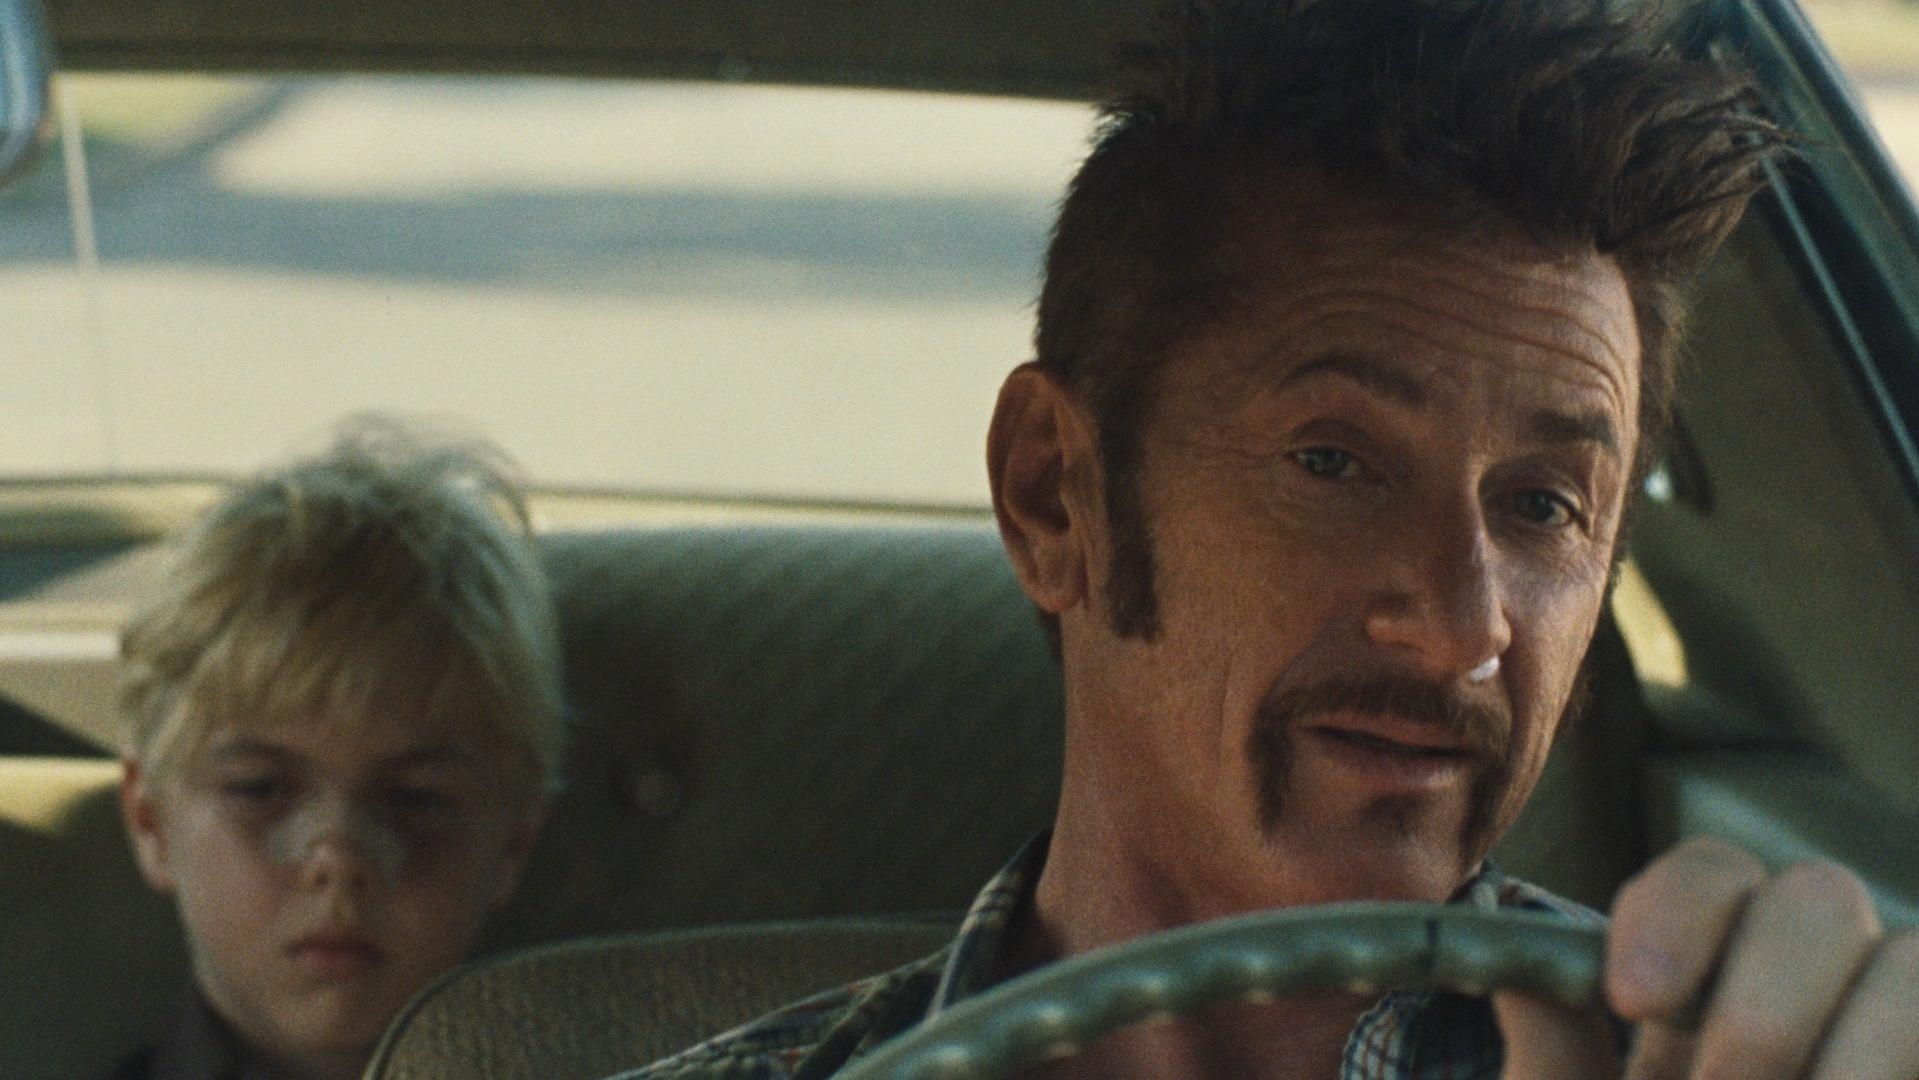 Sean Penn squares off against his daughter in dysfunctional family/crime drama Flag Day